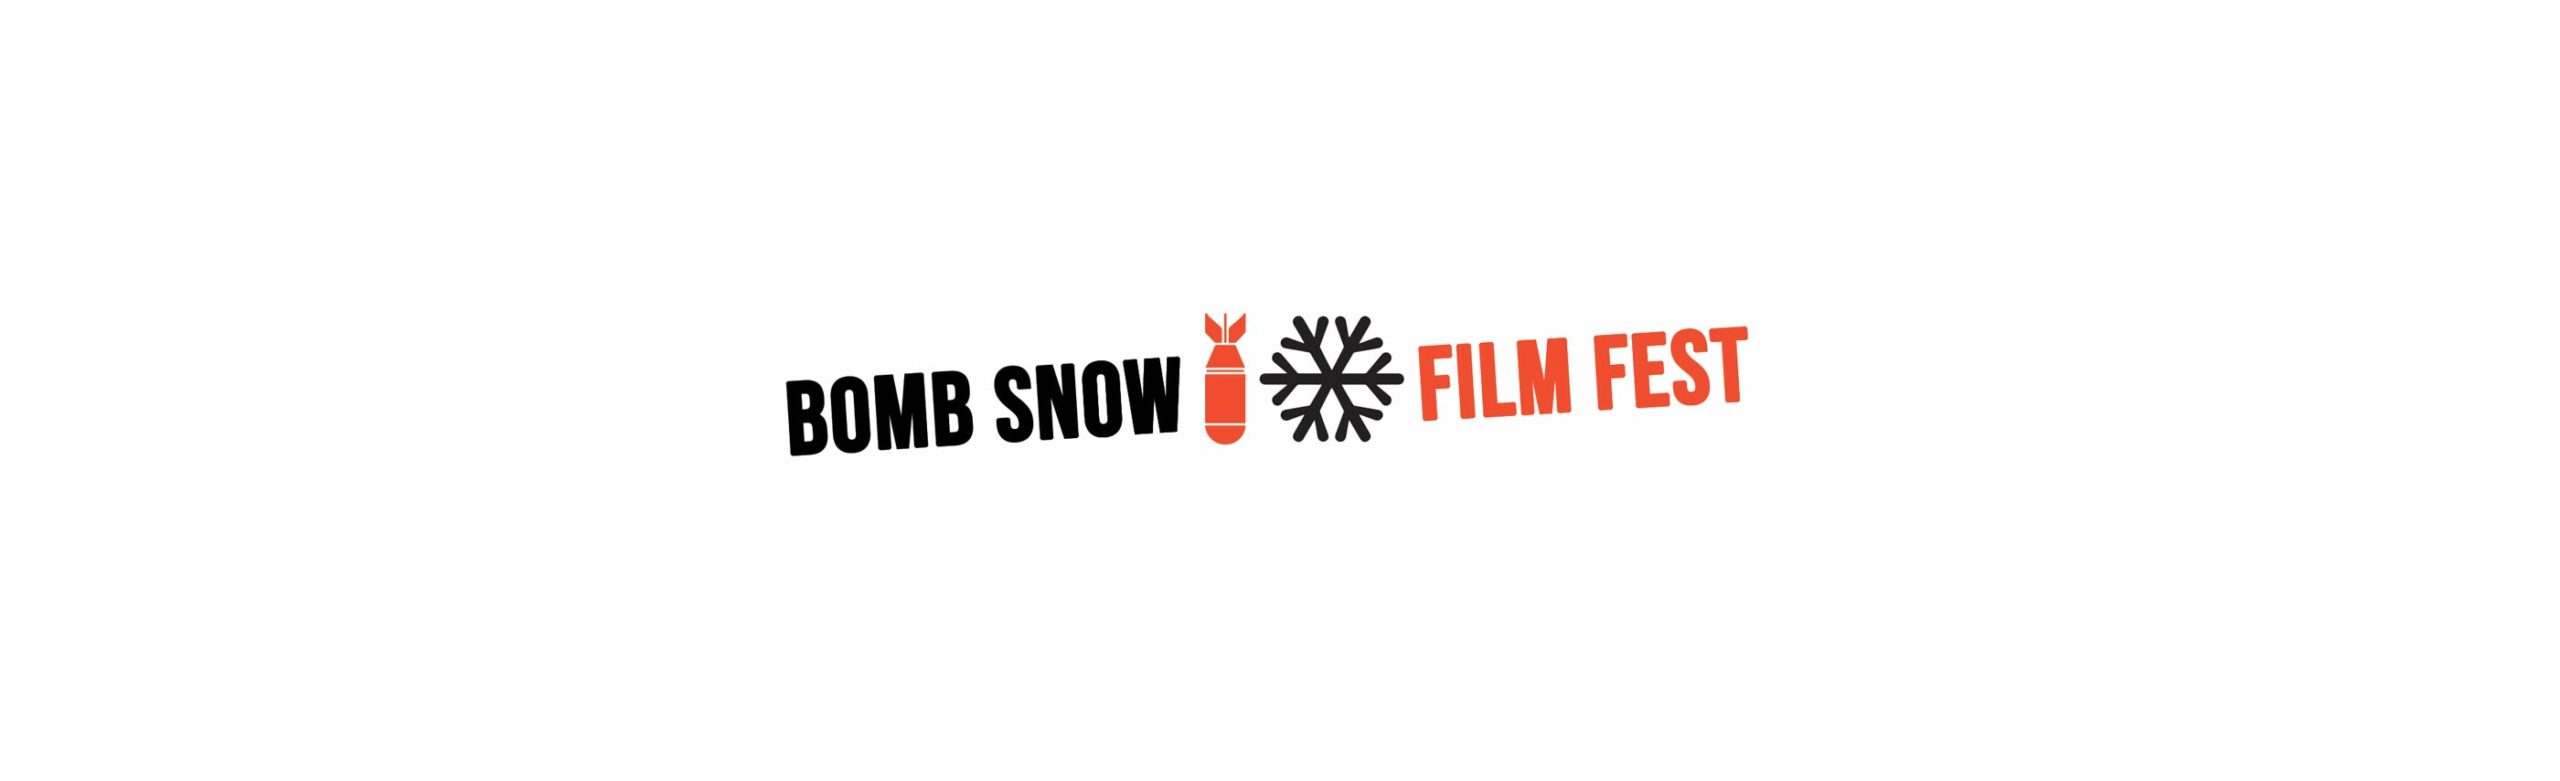 Event Info: Bomb Snow Film Festival at The Wilma 2021 Image